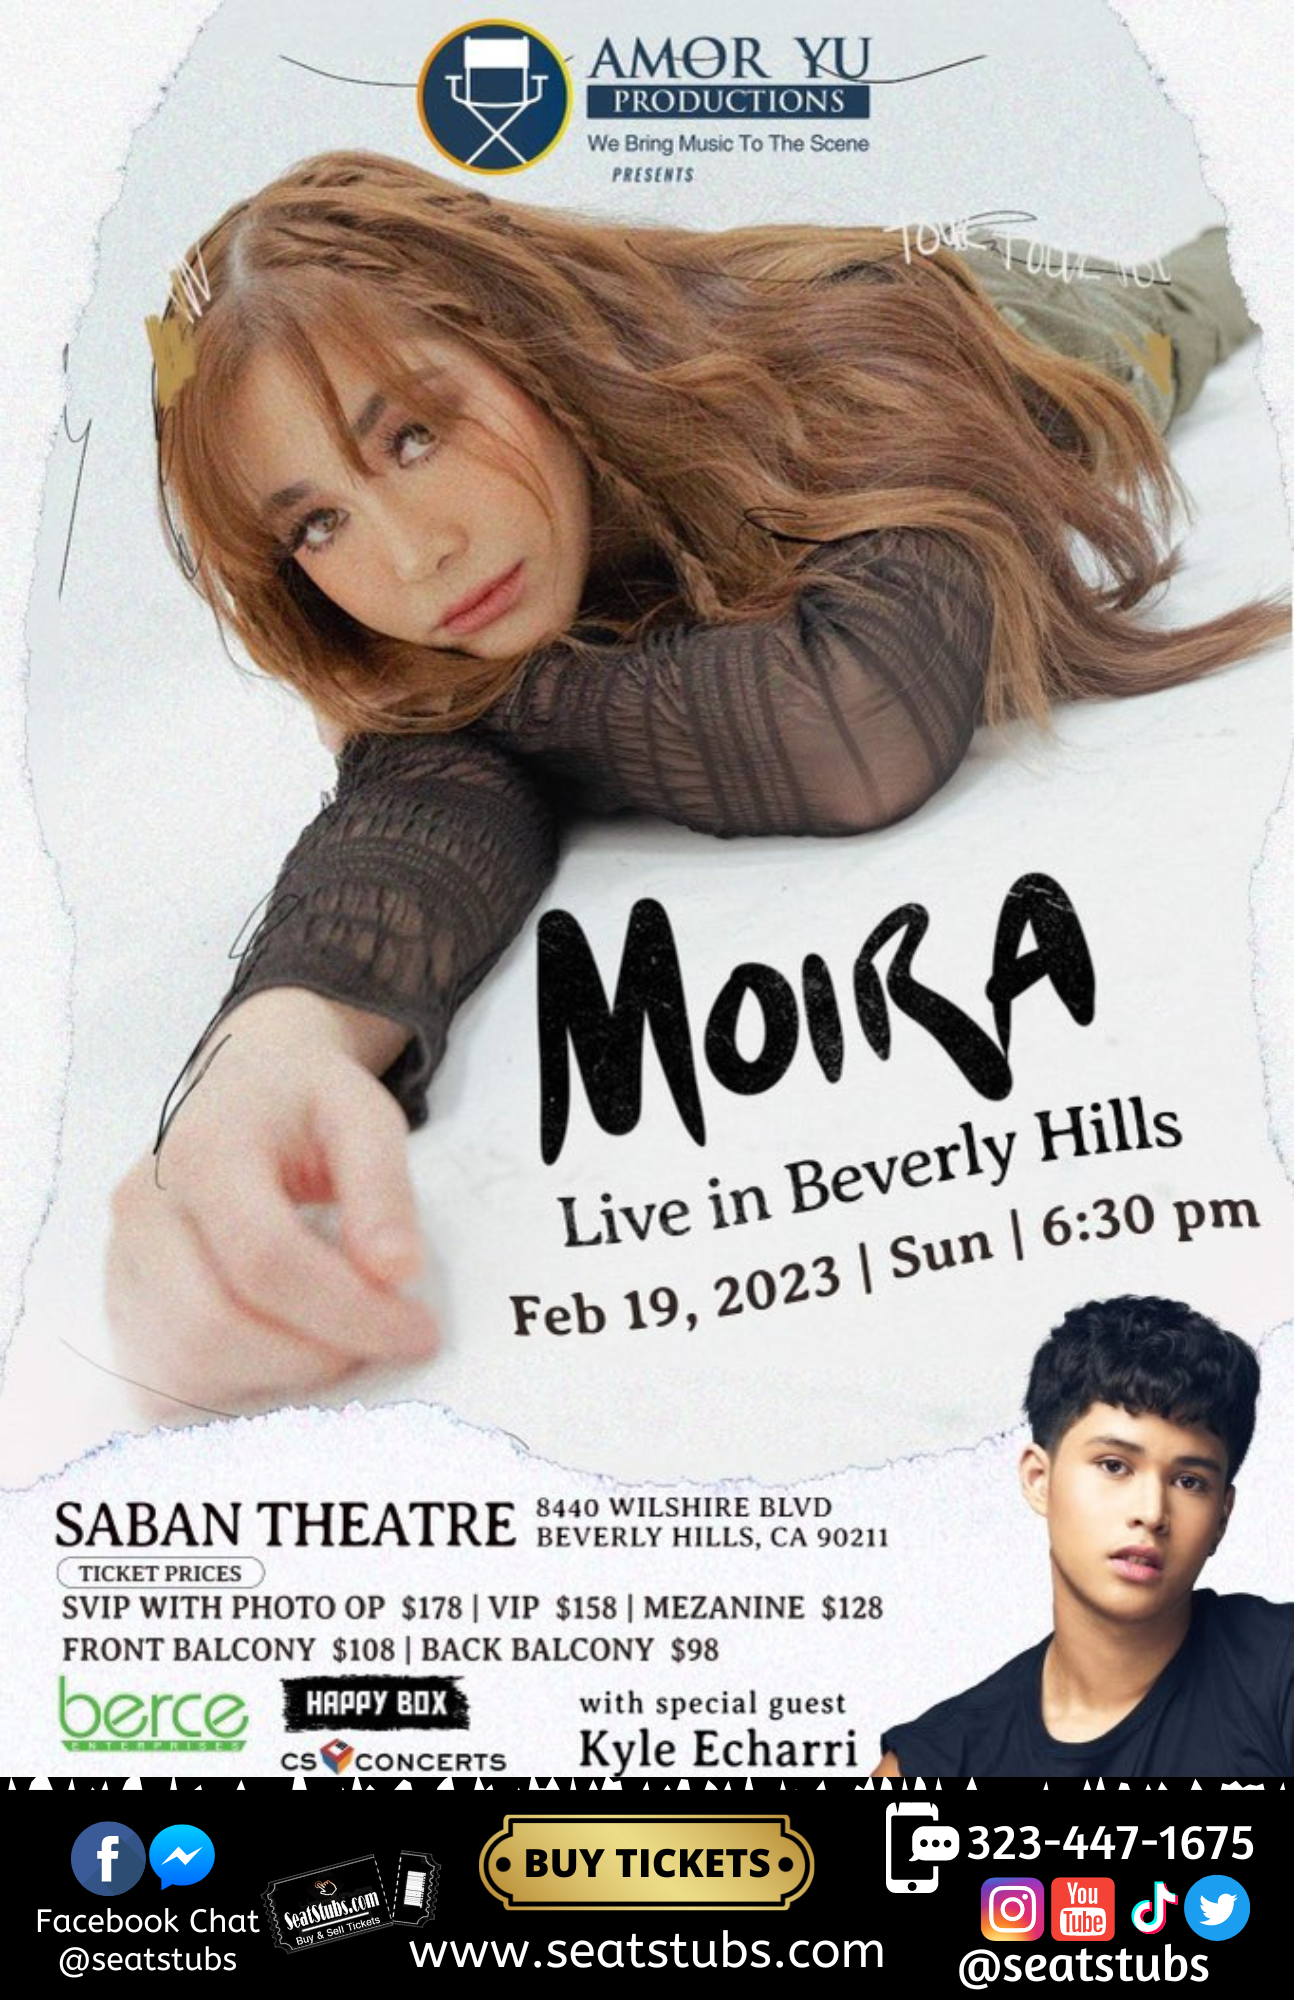 MOIRA LIVE IN BEVERLY HILLS SABAN THEATRE FEB 19, 2023